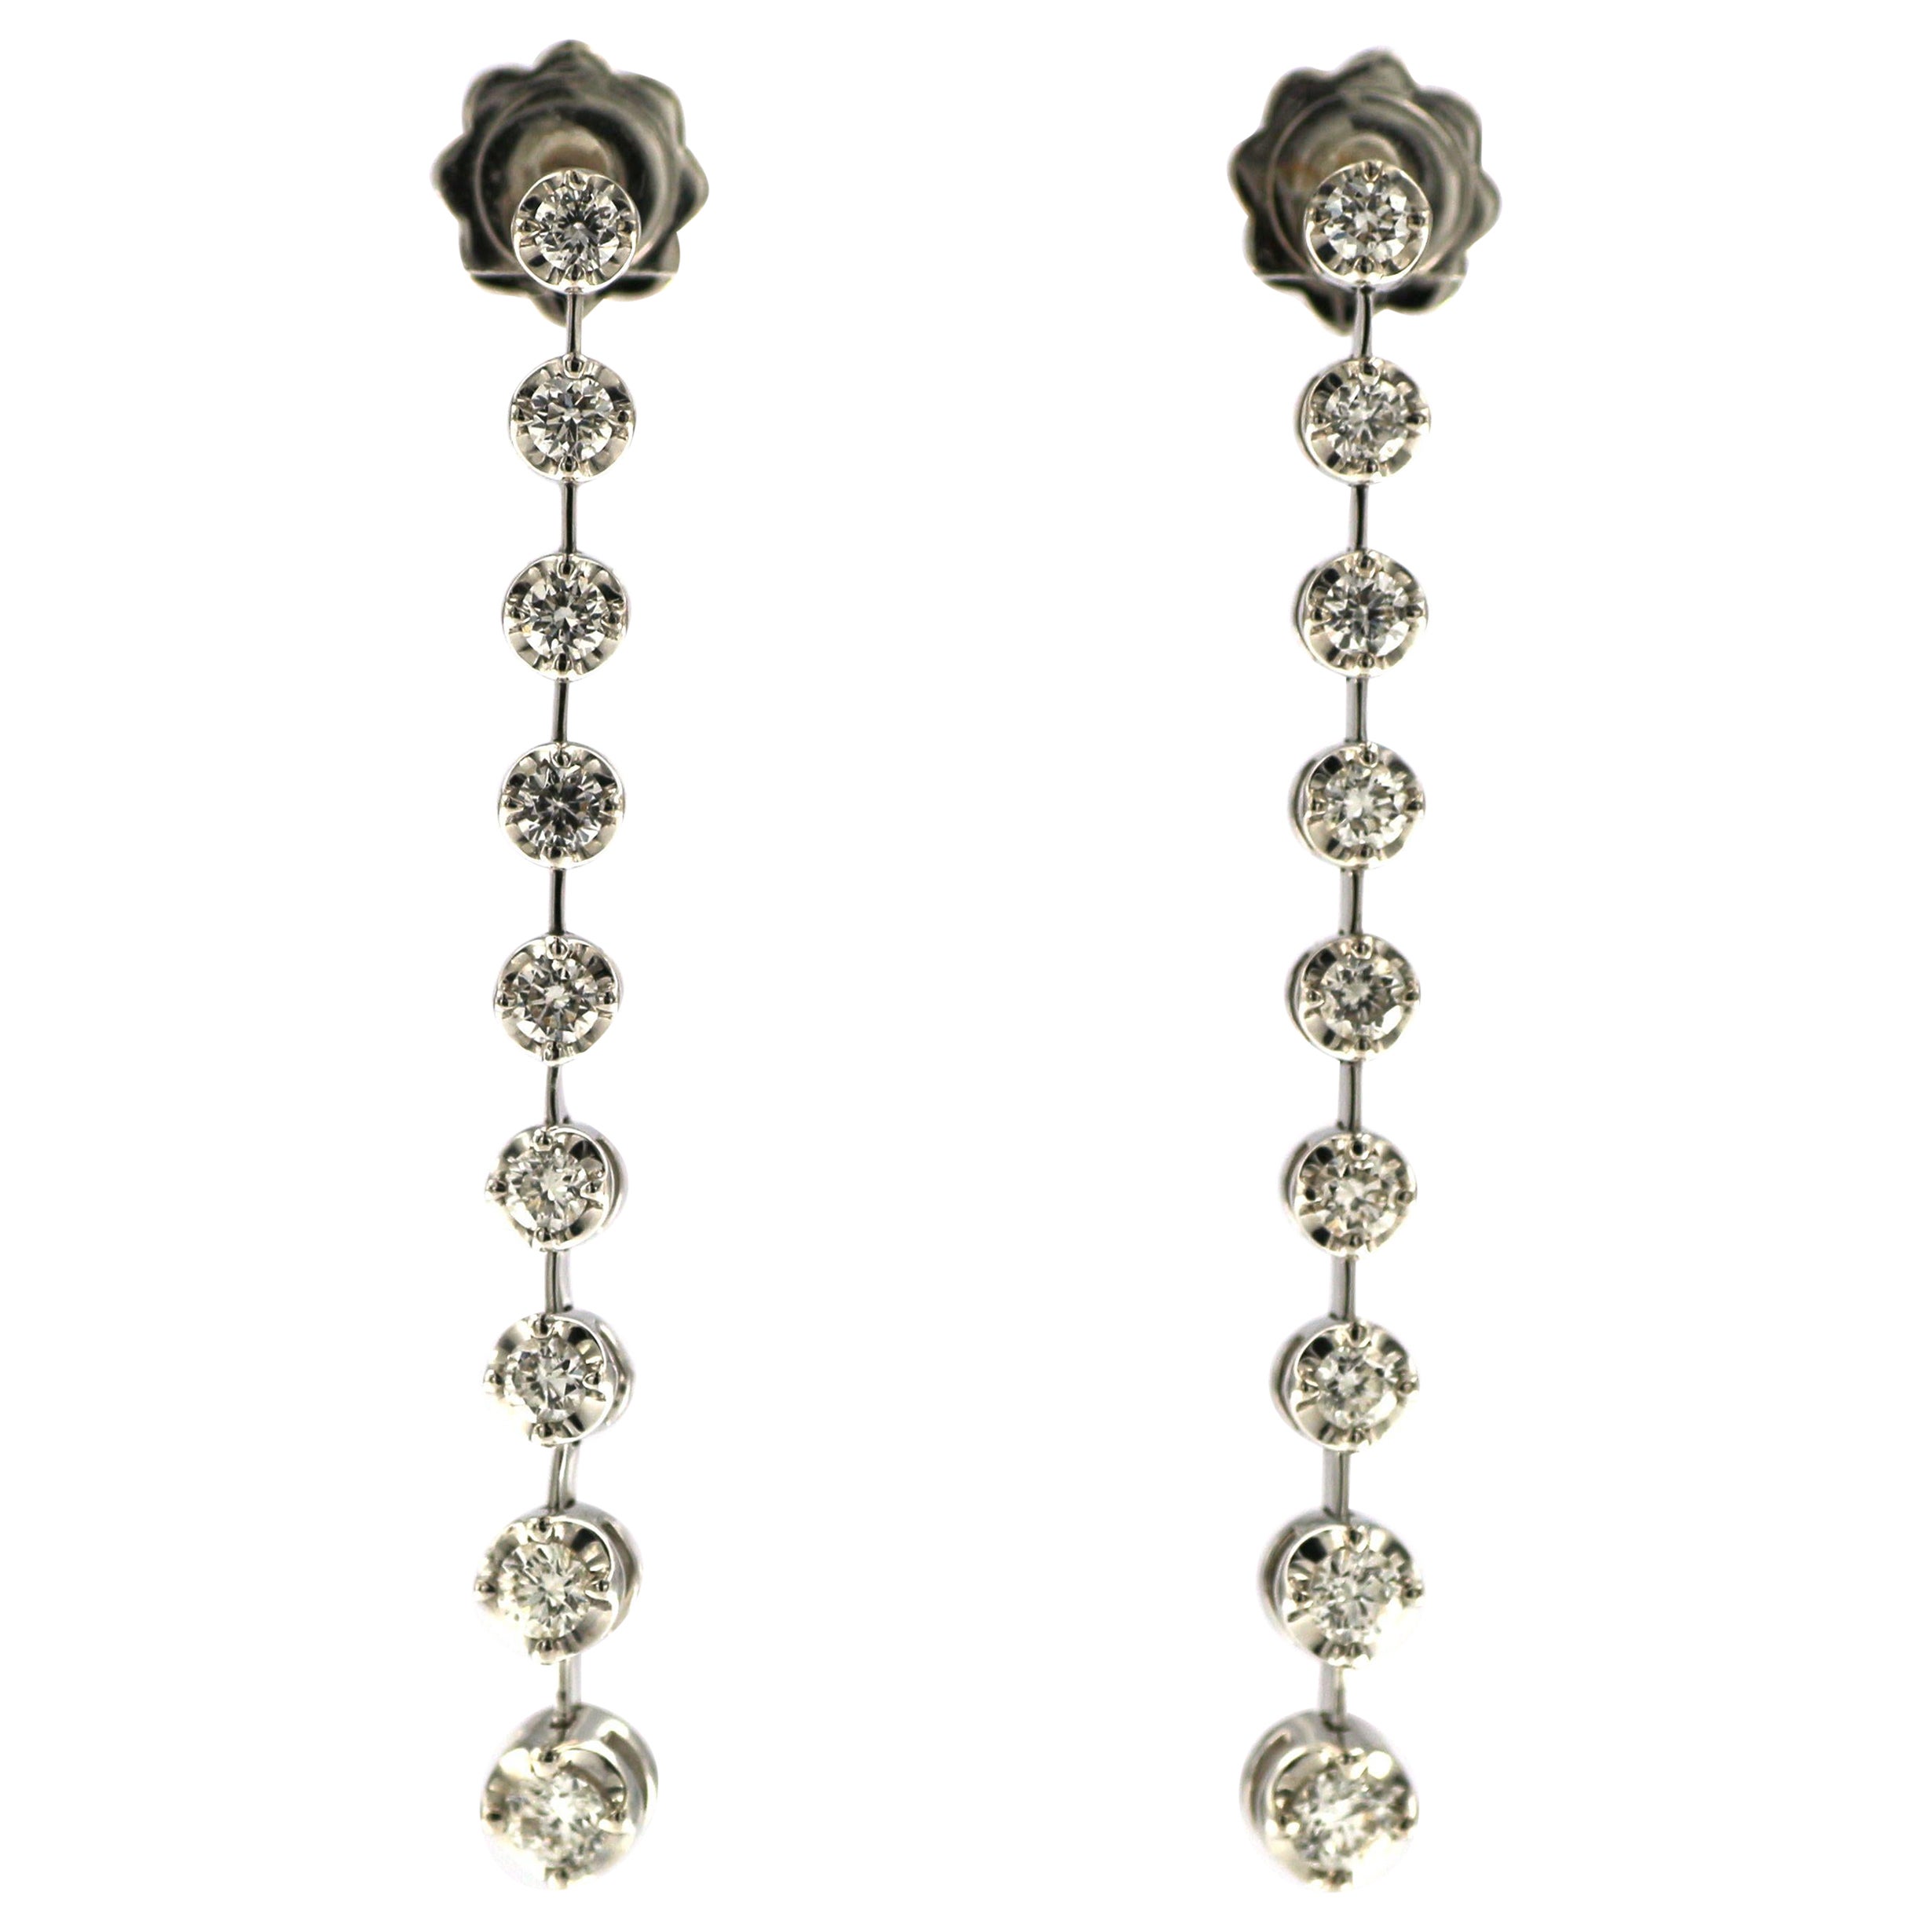 
These elegant diamond dangle drop earrings feature a cascade of round brilliant-cut diamonds, totaling approximately 0.95 carats. Each diamond is meticulously matched for size and set in a timeless bezel setting that enhances their individual